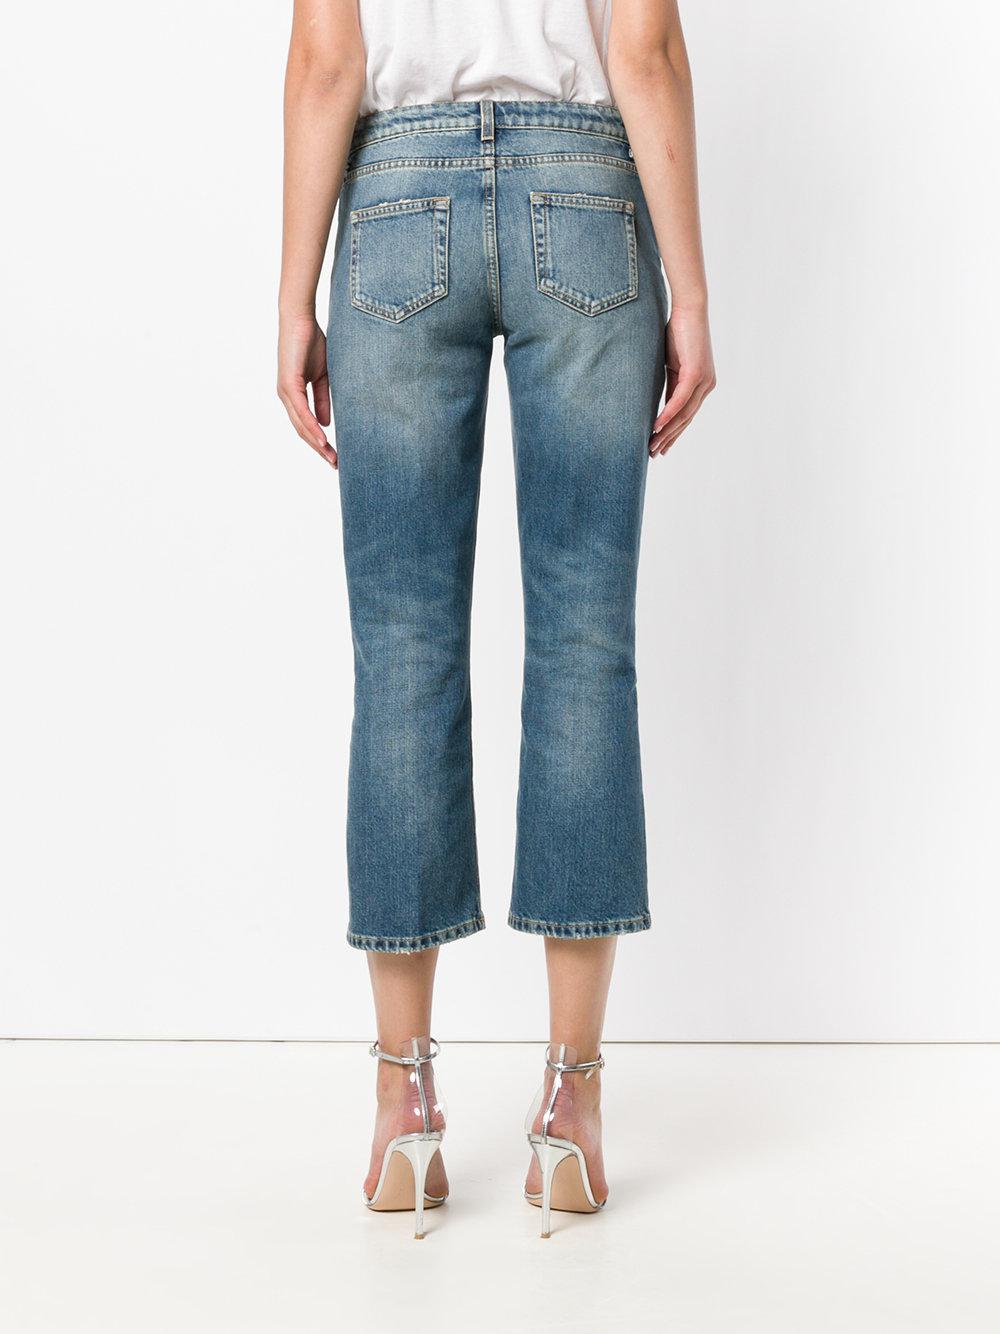 Saint Laurent Cropped Bootcut Jeans in Blue - Lyst